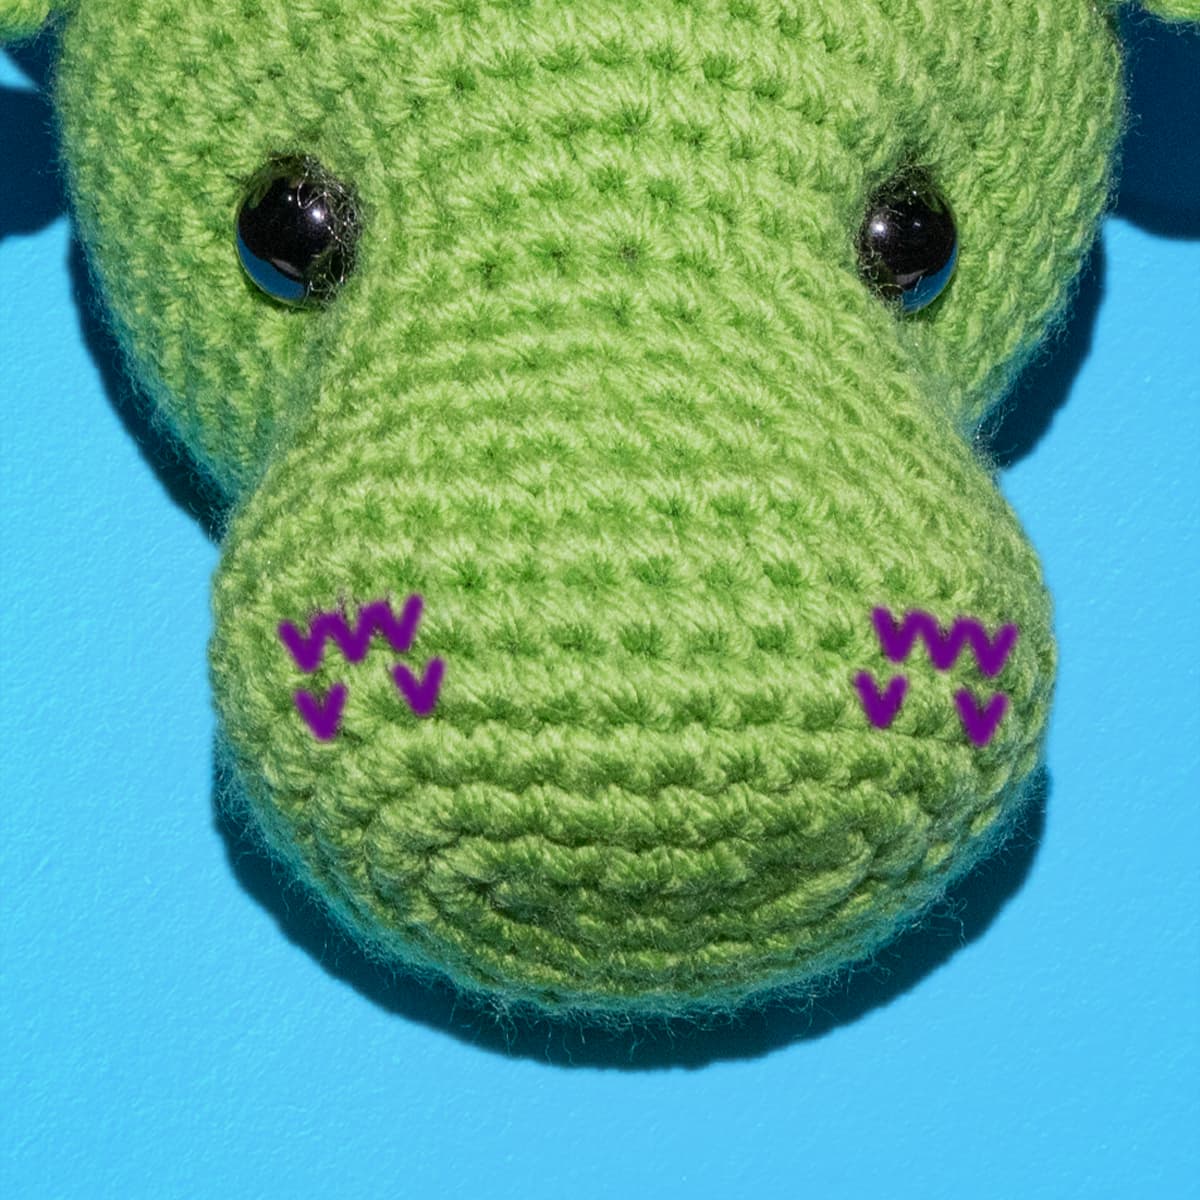 Crochet Dragon Tutorial (Photo 3 - Where to Place the Nostrils)